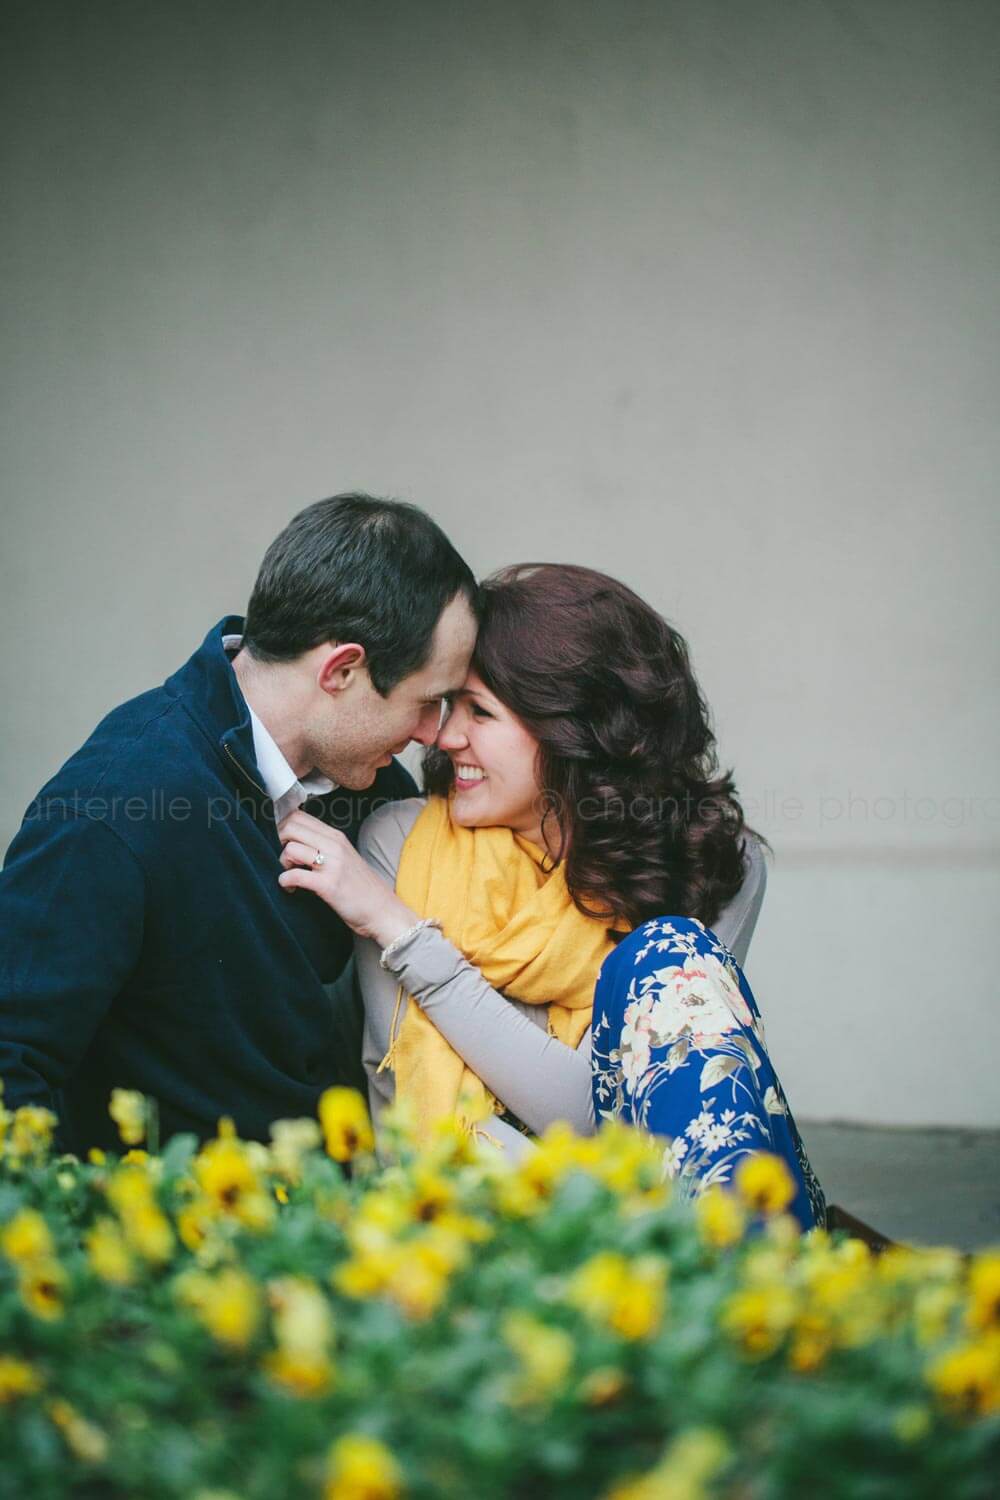 birmingham engagement session with yellow flowers